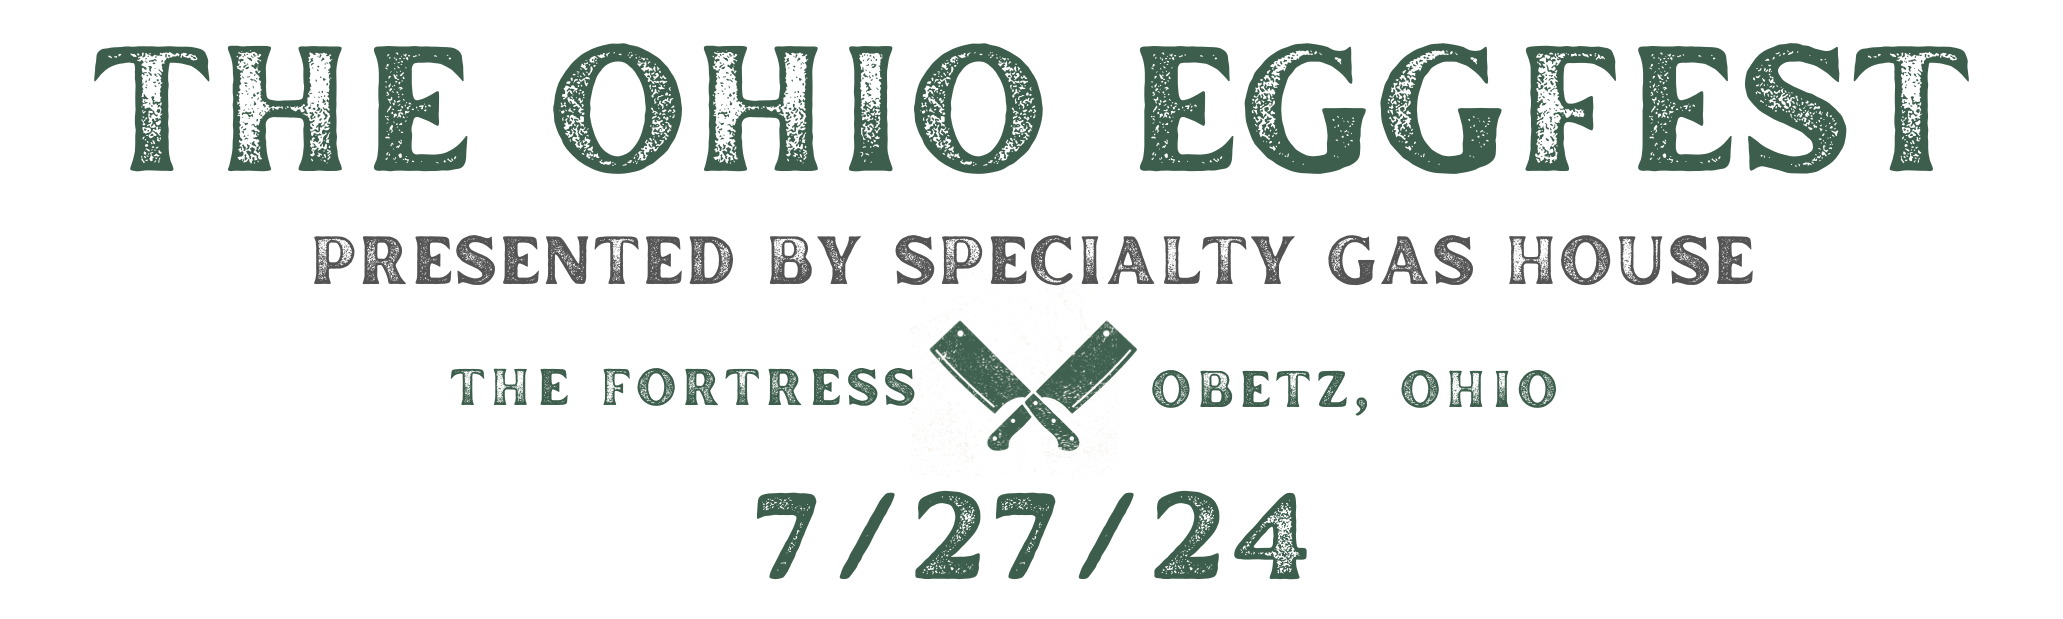 the ohio eggfest presented by specialty gas house columbus ohio date and location